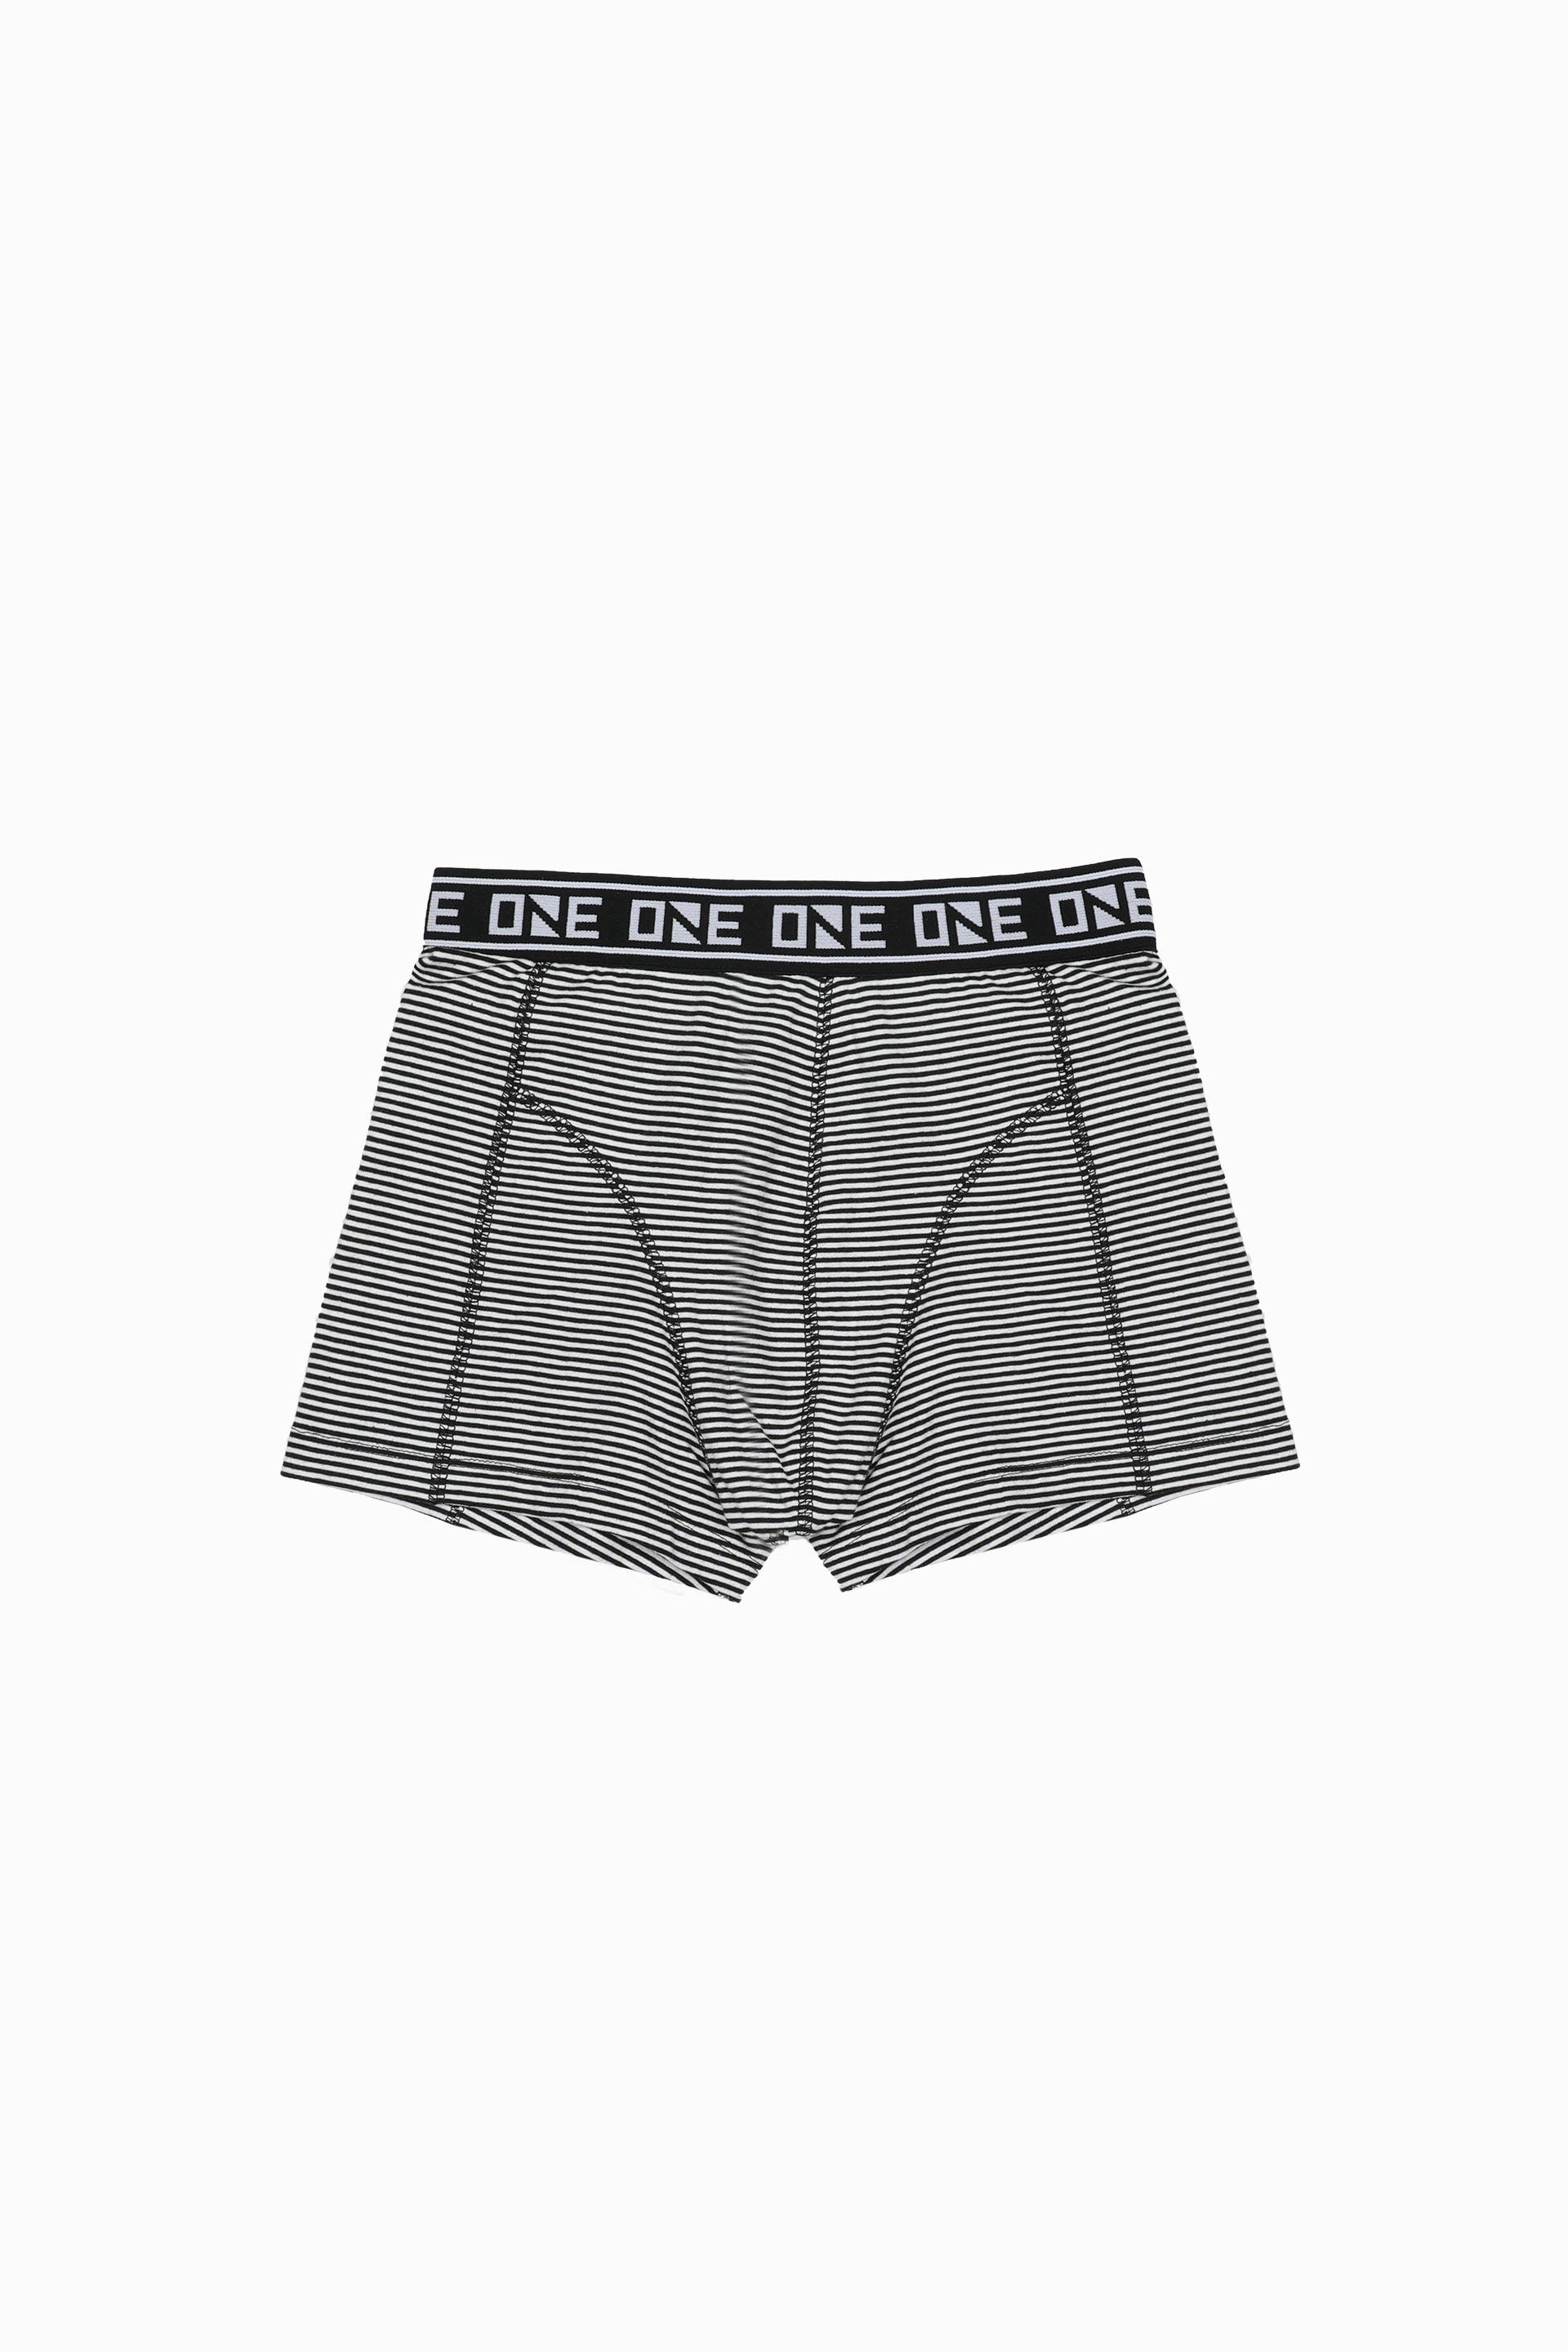 Pencil Boxers Multi (Pack of 3)